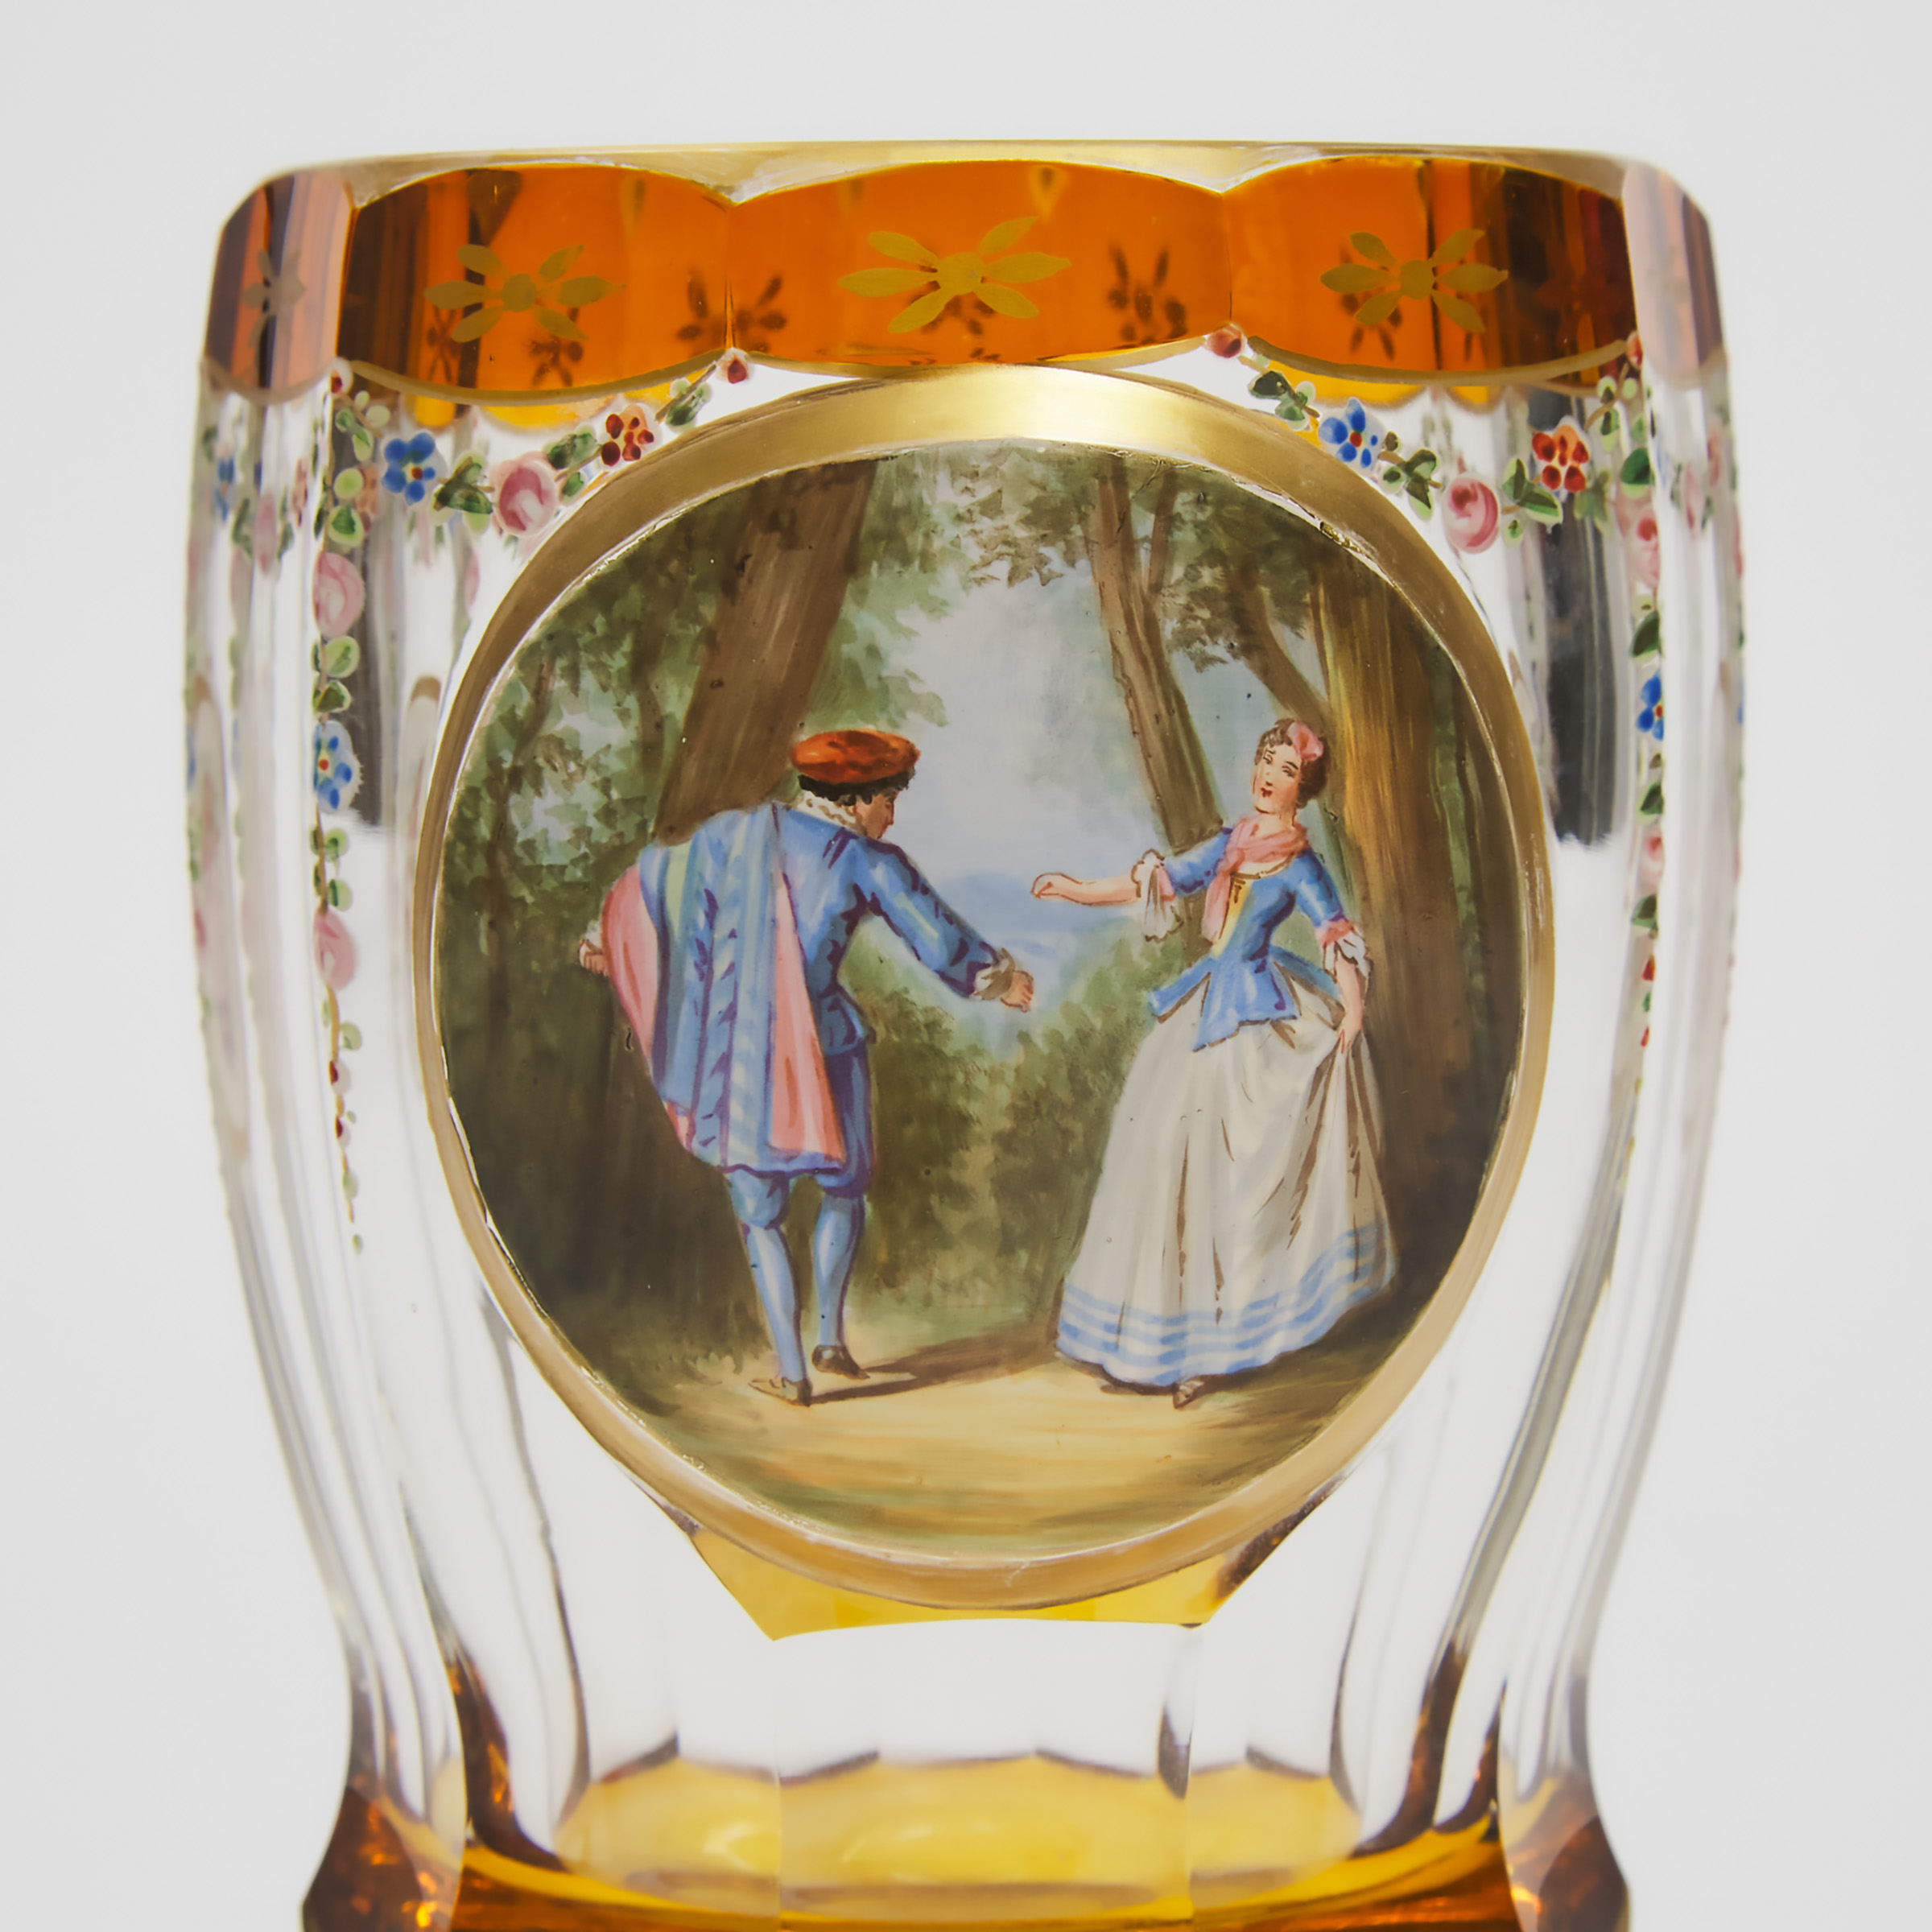 Bohemian Overlaid, Cut, and Enameled Glass Goblet, second half of the 19th century